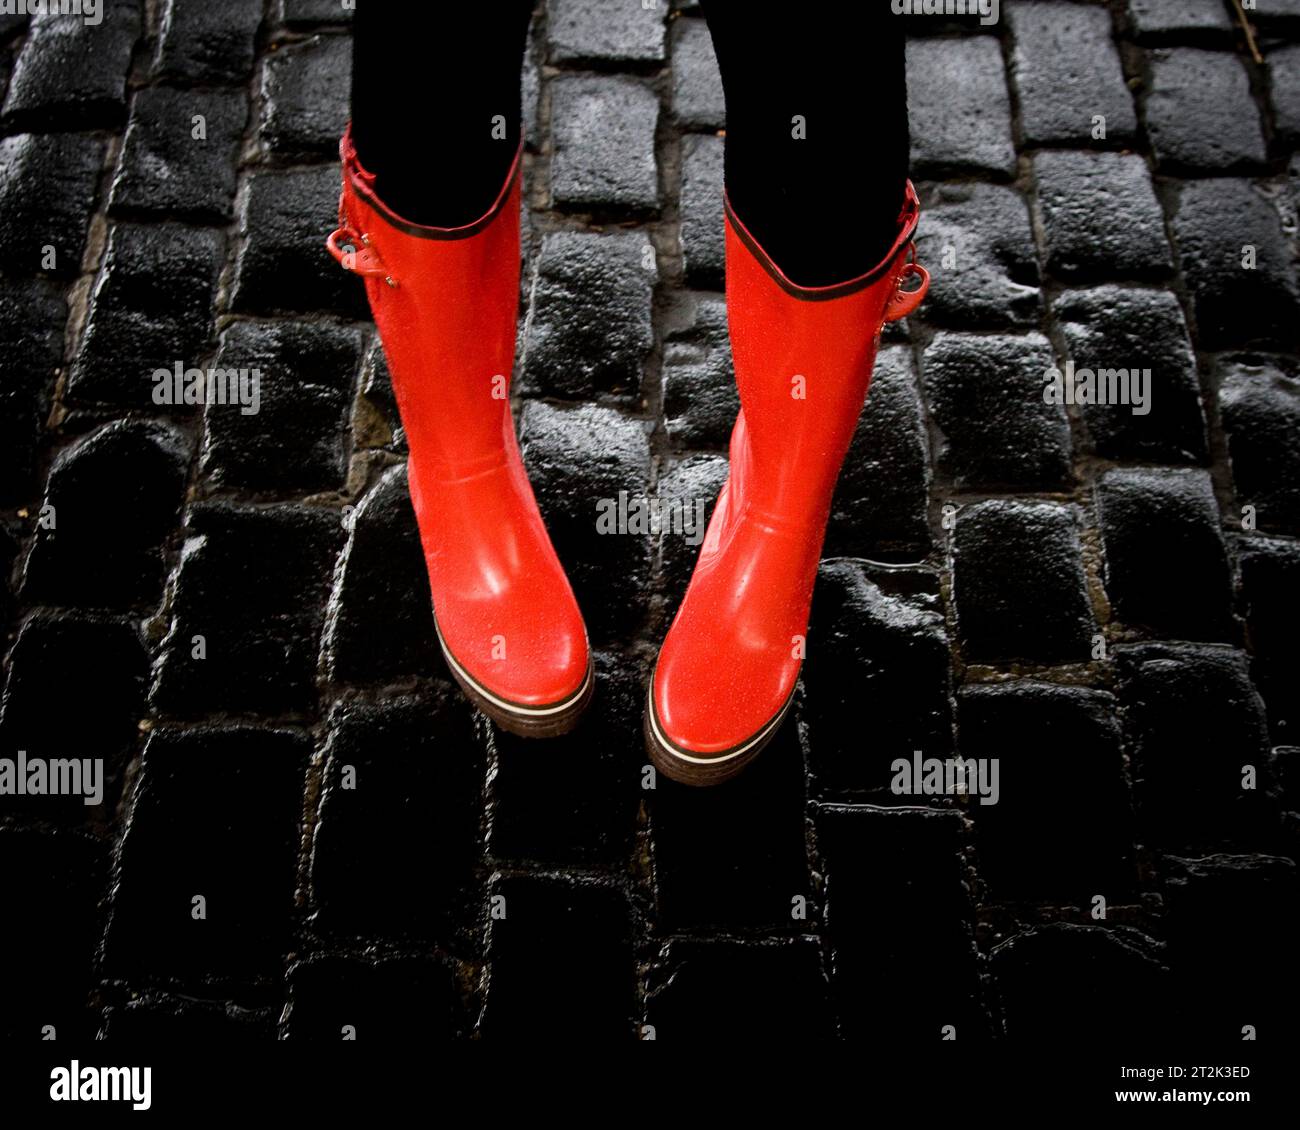 A pair of shiny red boots. Stock Photo